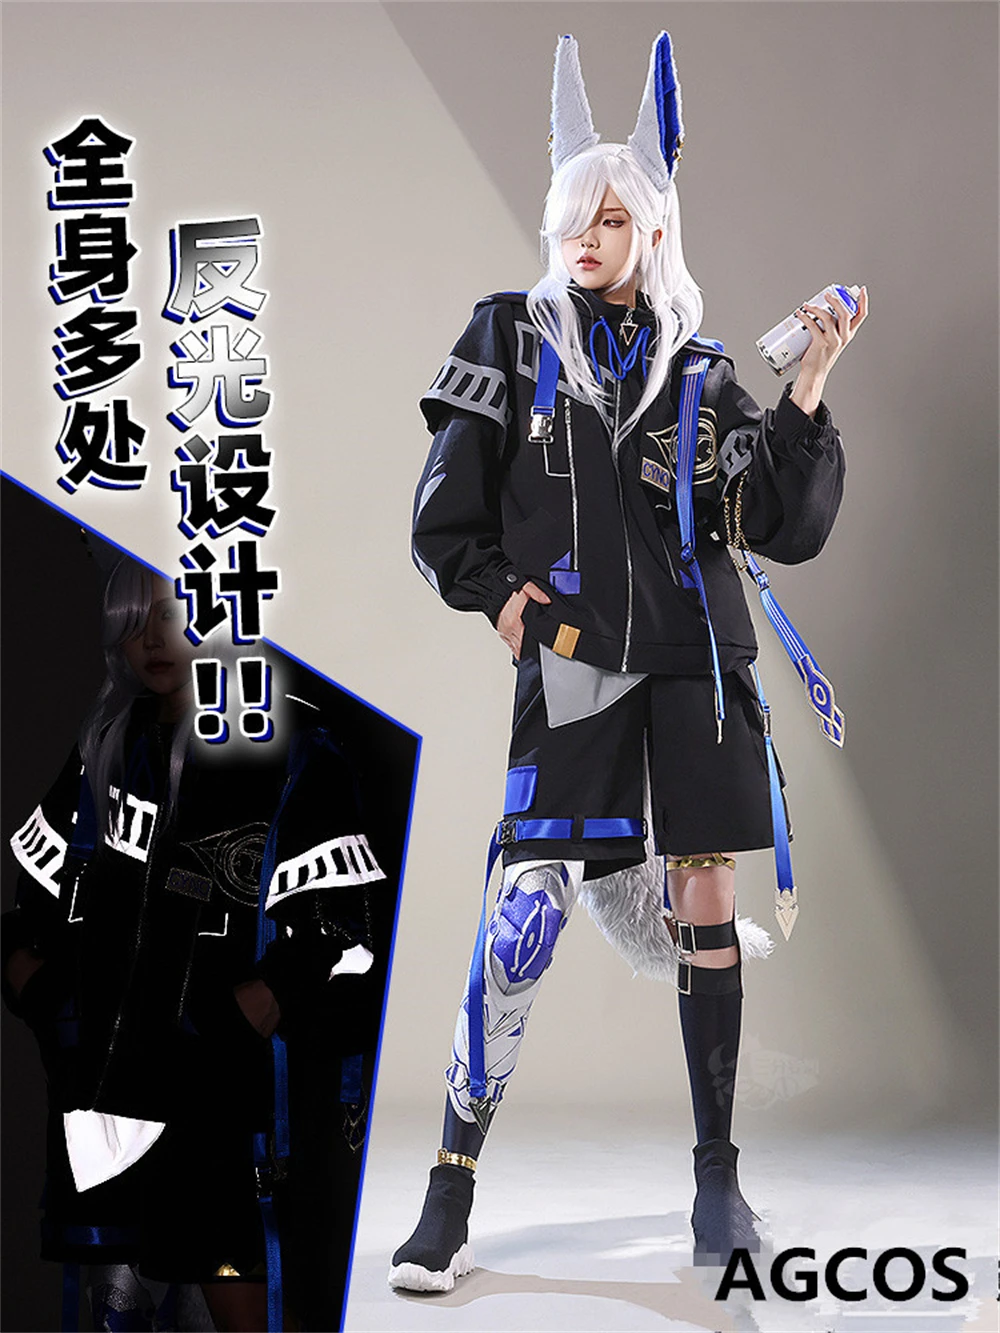 

AGCOS Game Genshin Impact Beast Cyno Cosplay Costume Doujin Cyno Male Christmas Outfits Clothes Cosplay Costumes